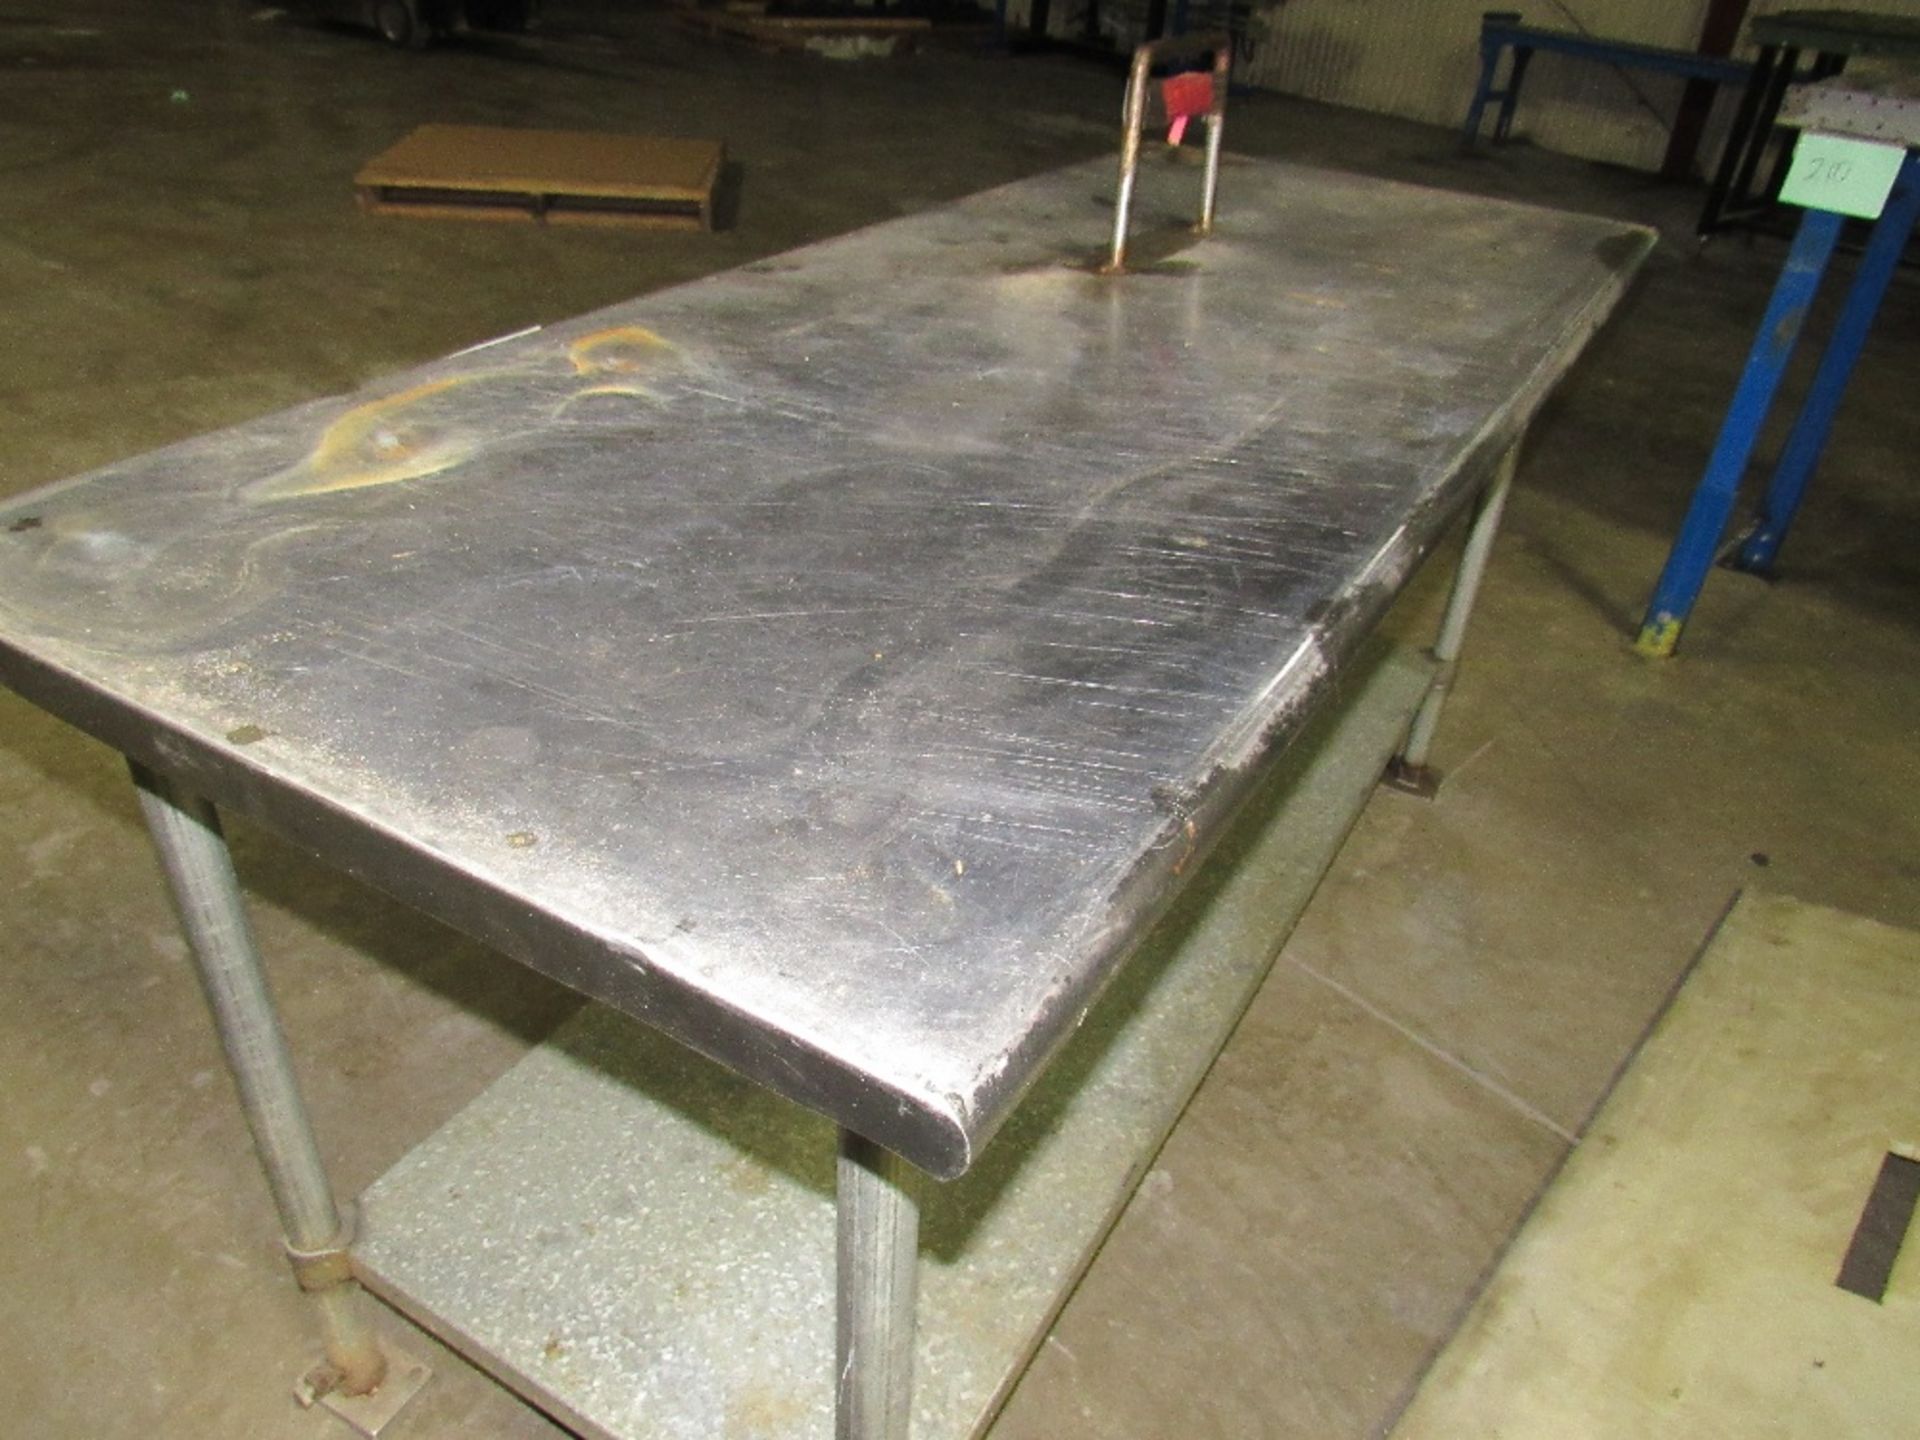 Stainless Steel Table with Teflon removable Plate Cover - Galvanized second surface -- (RIGGING - Image 13 of 14